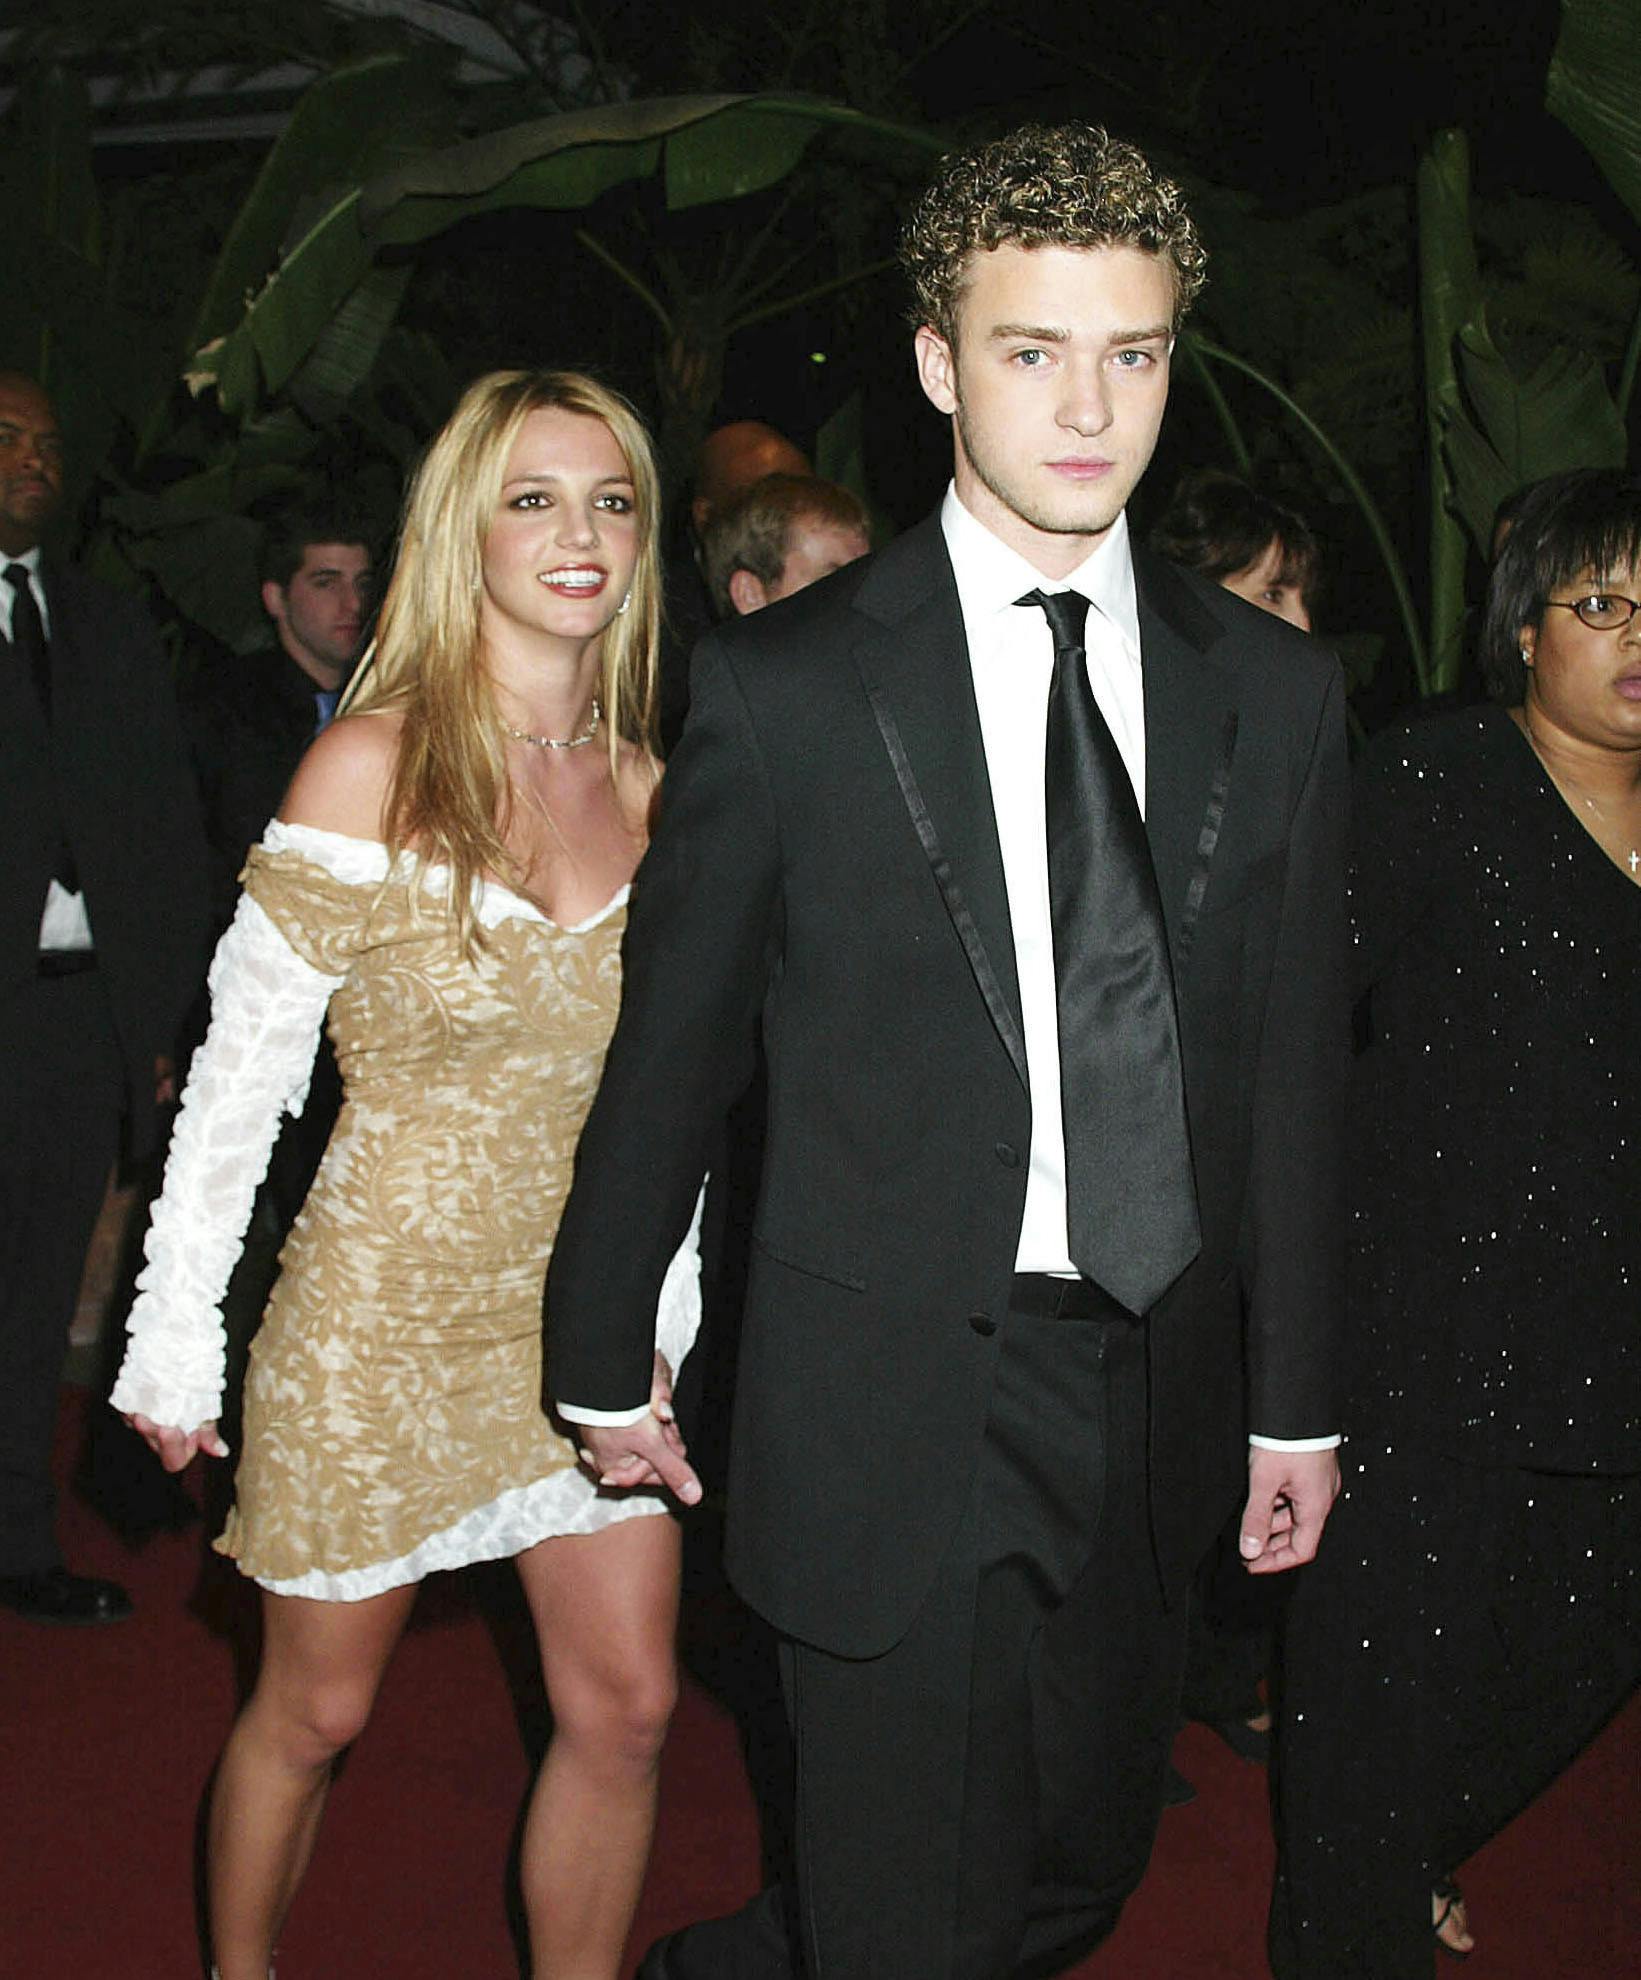 OCTOBER 17th 2023: Britney Spears reveals she had an abortion in 2000 because Justin Timberlake "did not want to be a father." Her new memoir, "The Woman In Me" is scheduled for release on October 24th. - File Photo by: zz/Russ Einhorn/STAR MAX/IPx 2002 2/26/02 Britney Spears and Justin Timberlake at a pre-Grammy Awards party held on February 26, 2002 at The Beverly Hills Hotel in Beverly Hills, Los Angeles, California.